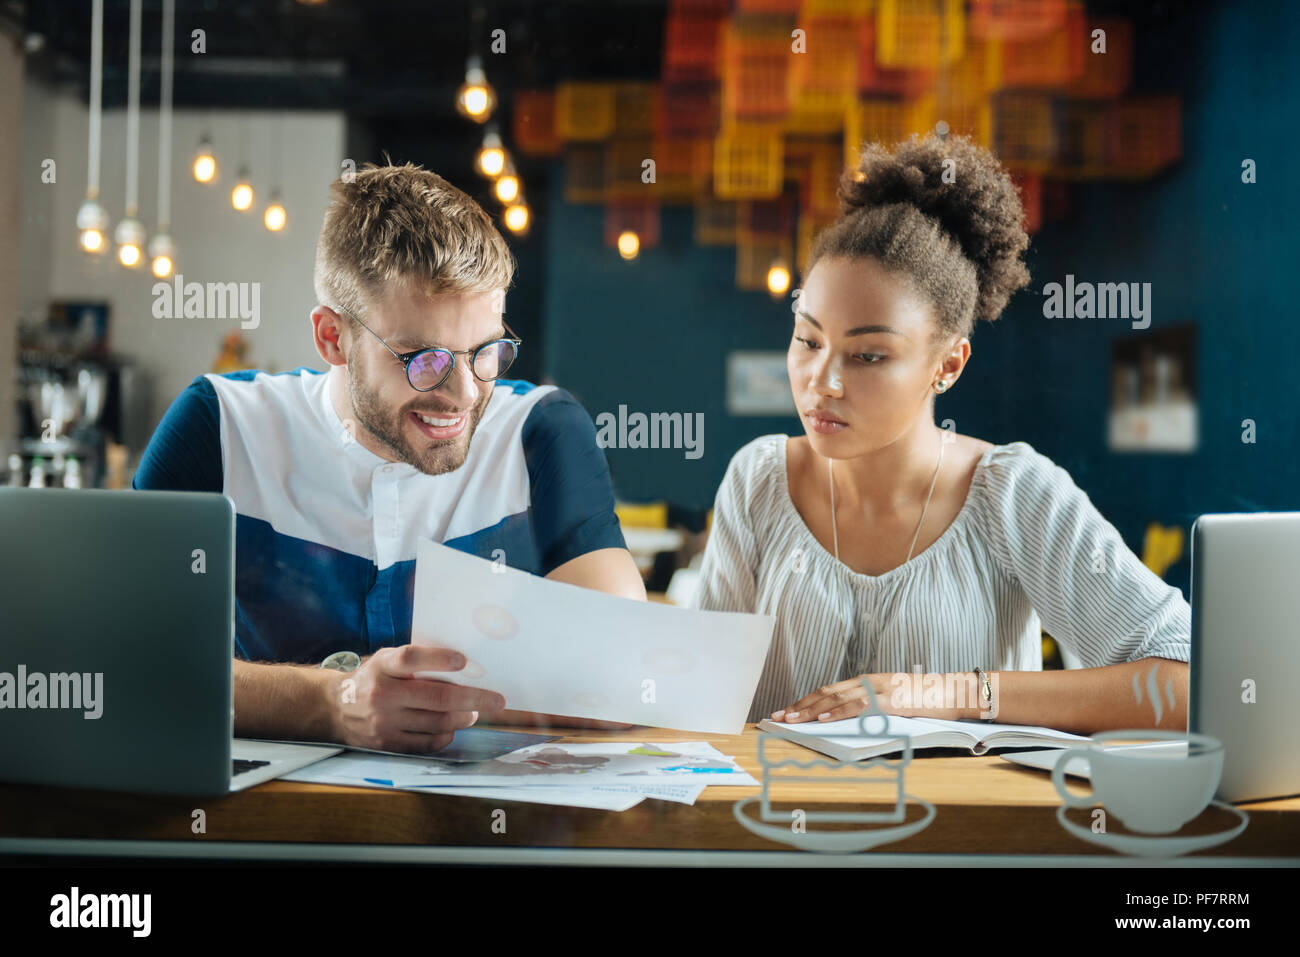 Hardworking involved freelancers looking at some documents Stock Photo